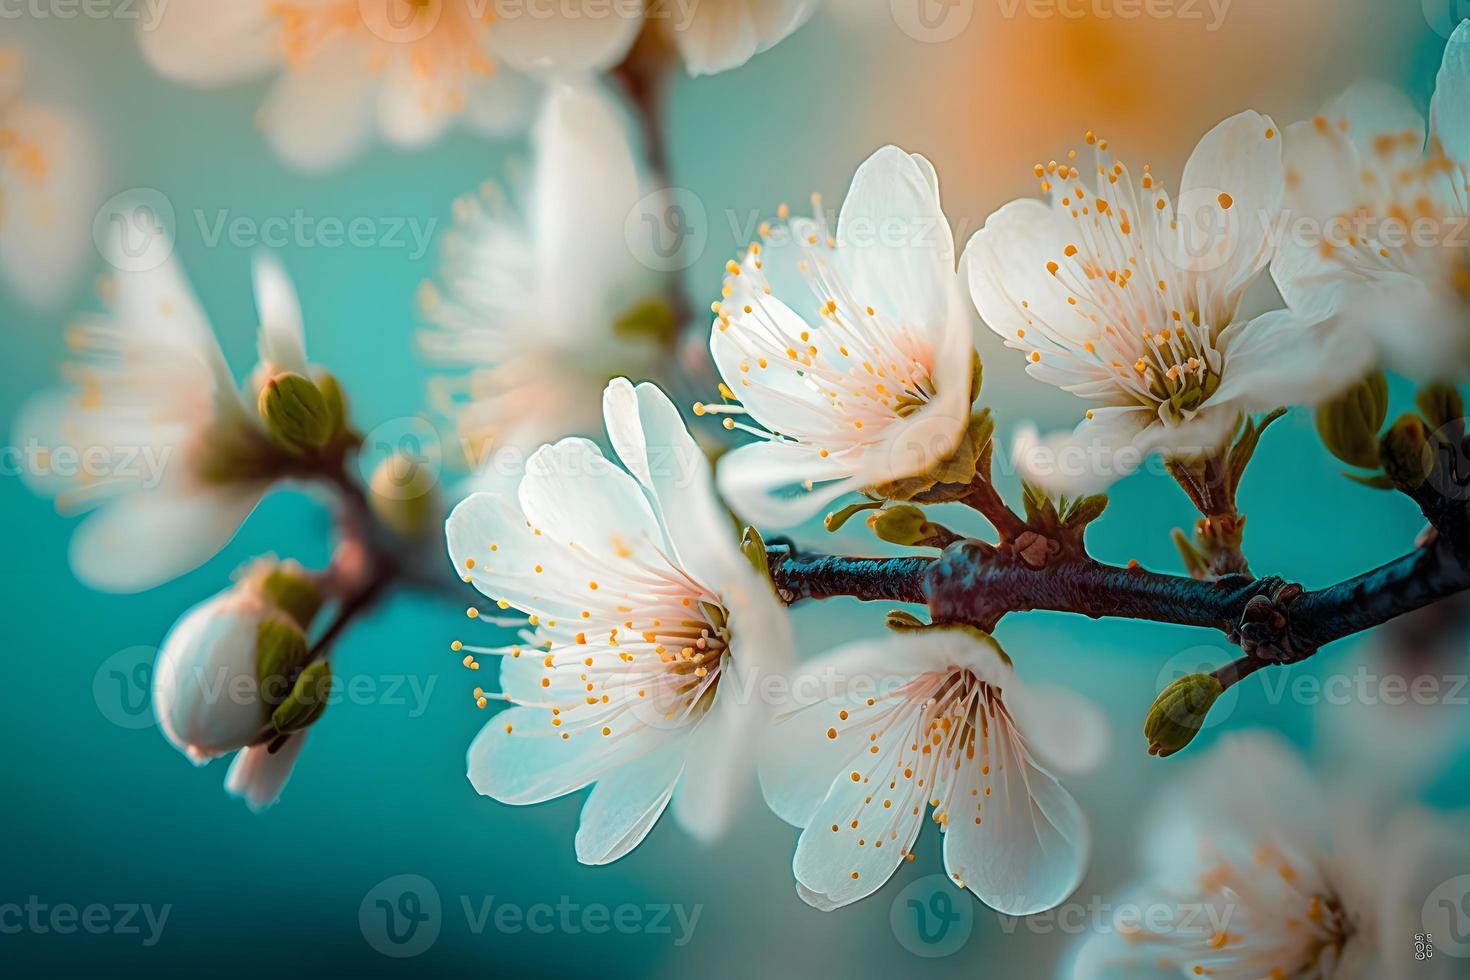 Photos Beautiful floral spring abstract background of nature. Branches of blossoming apricot macro with soft focus on gentle light blue sky background